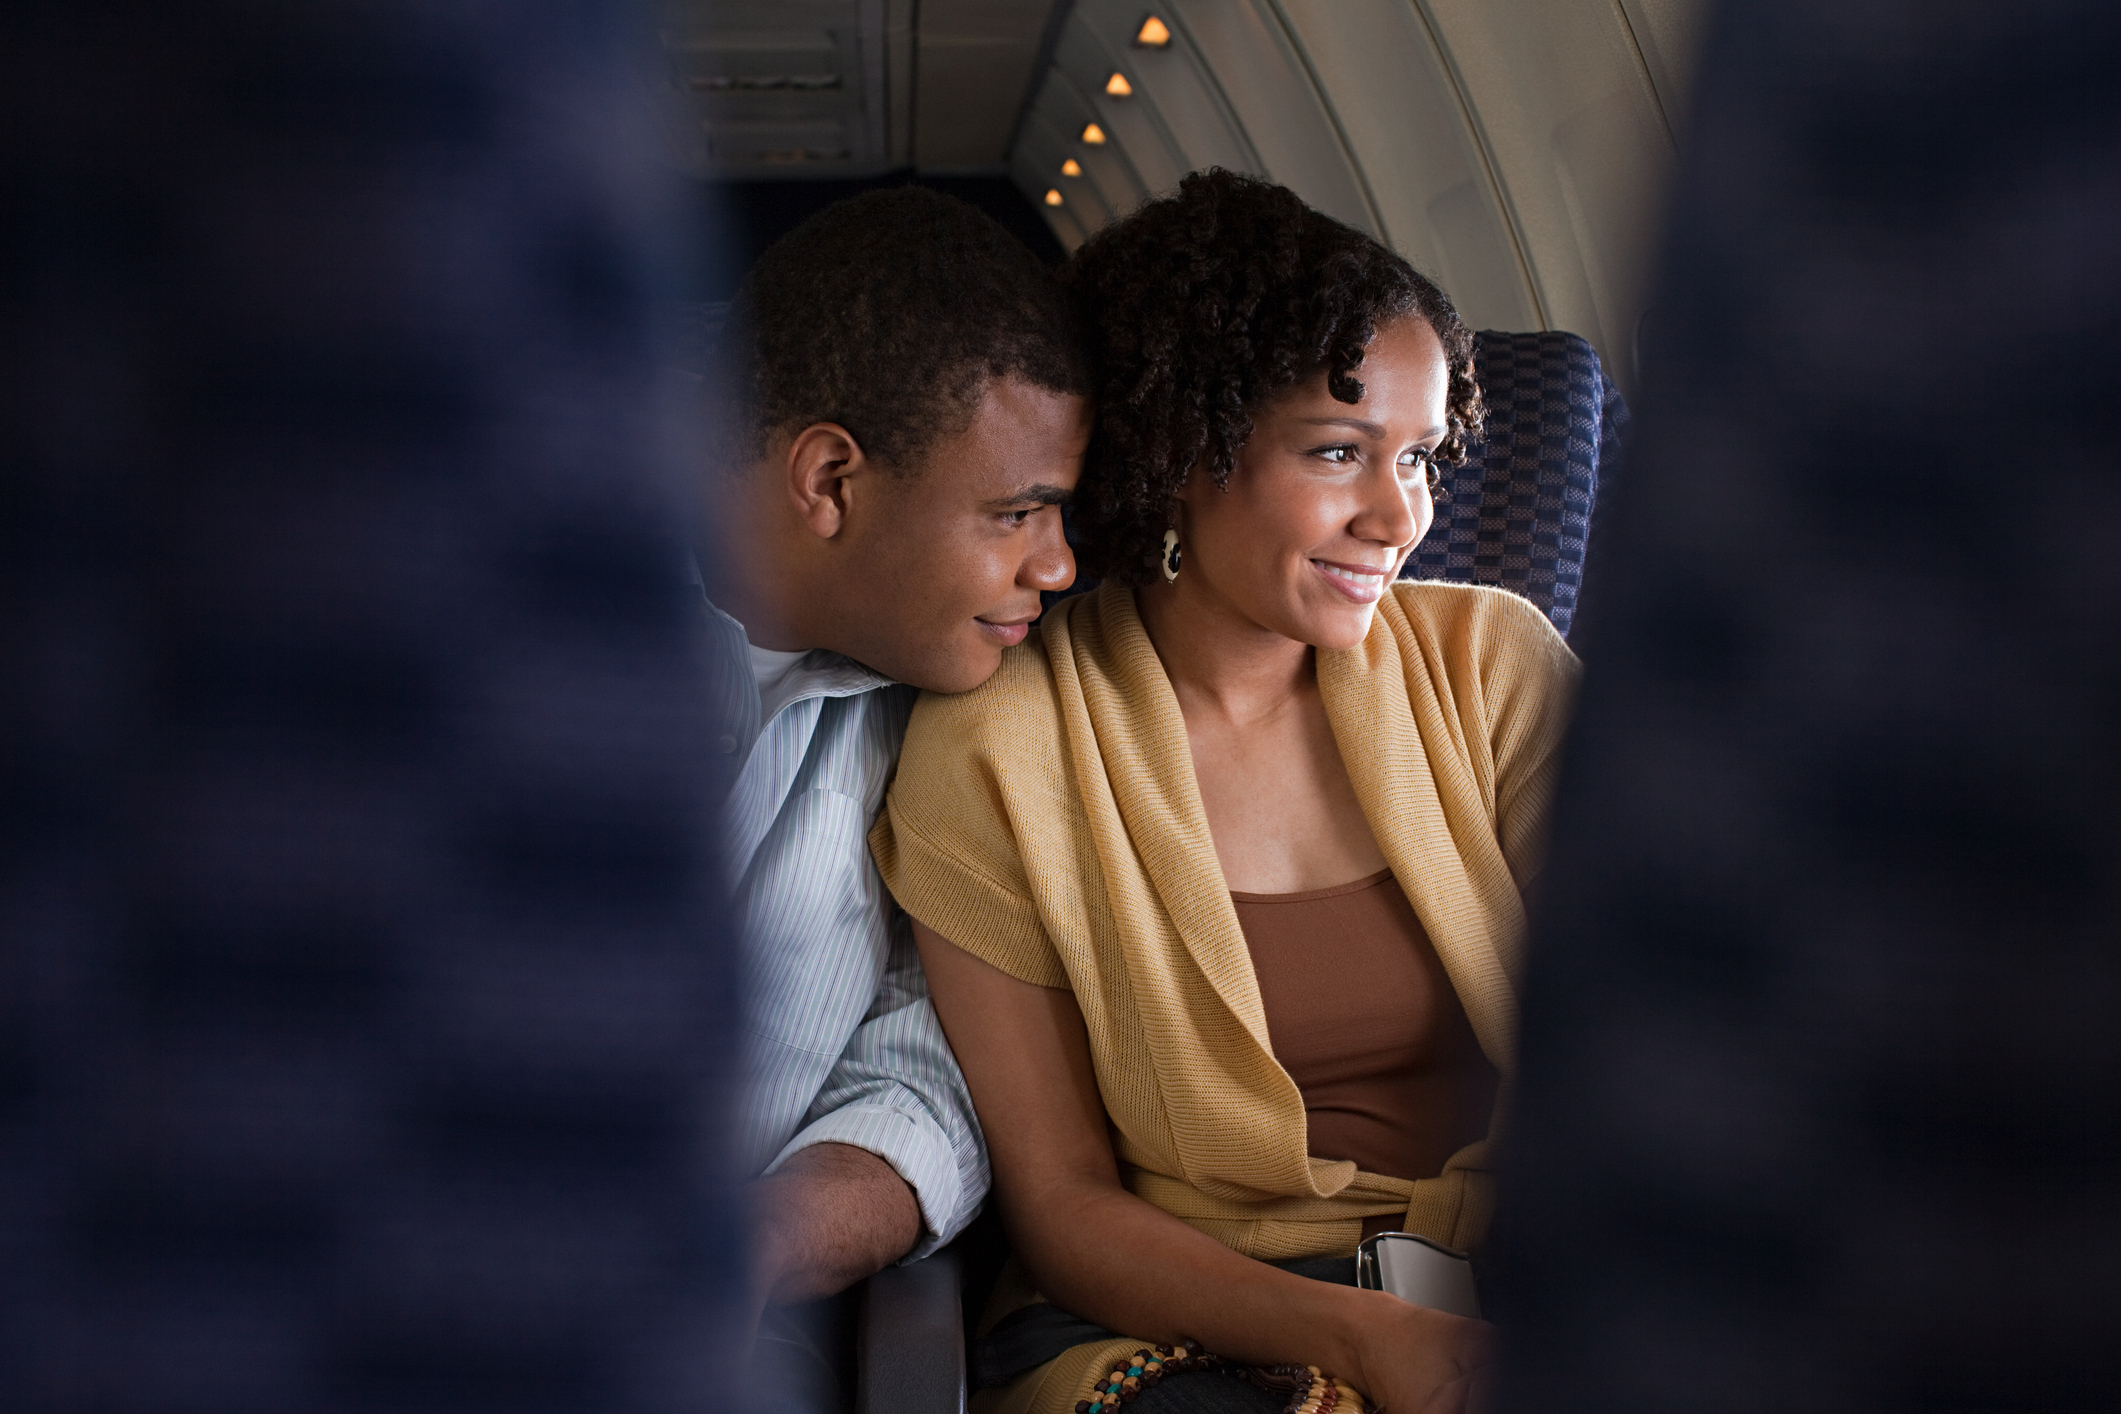 Two people smiling and looking out an airplane window. The image is used to convey a cozy travel experience, related to Tasty category article